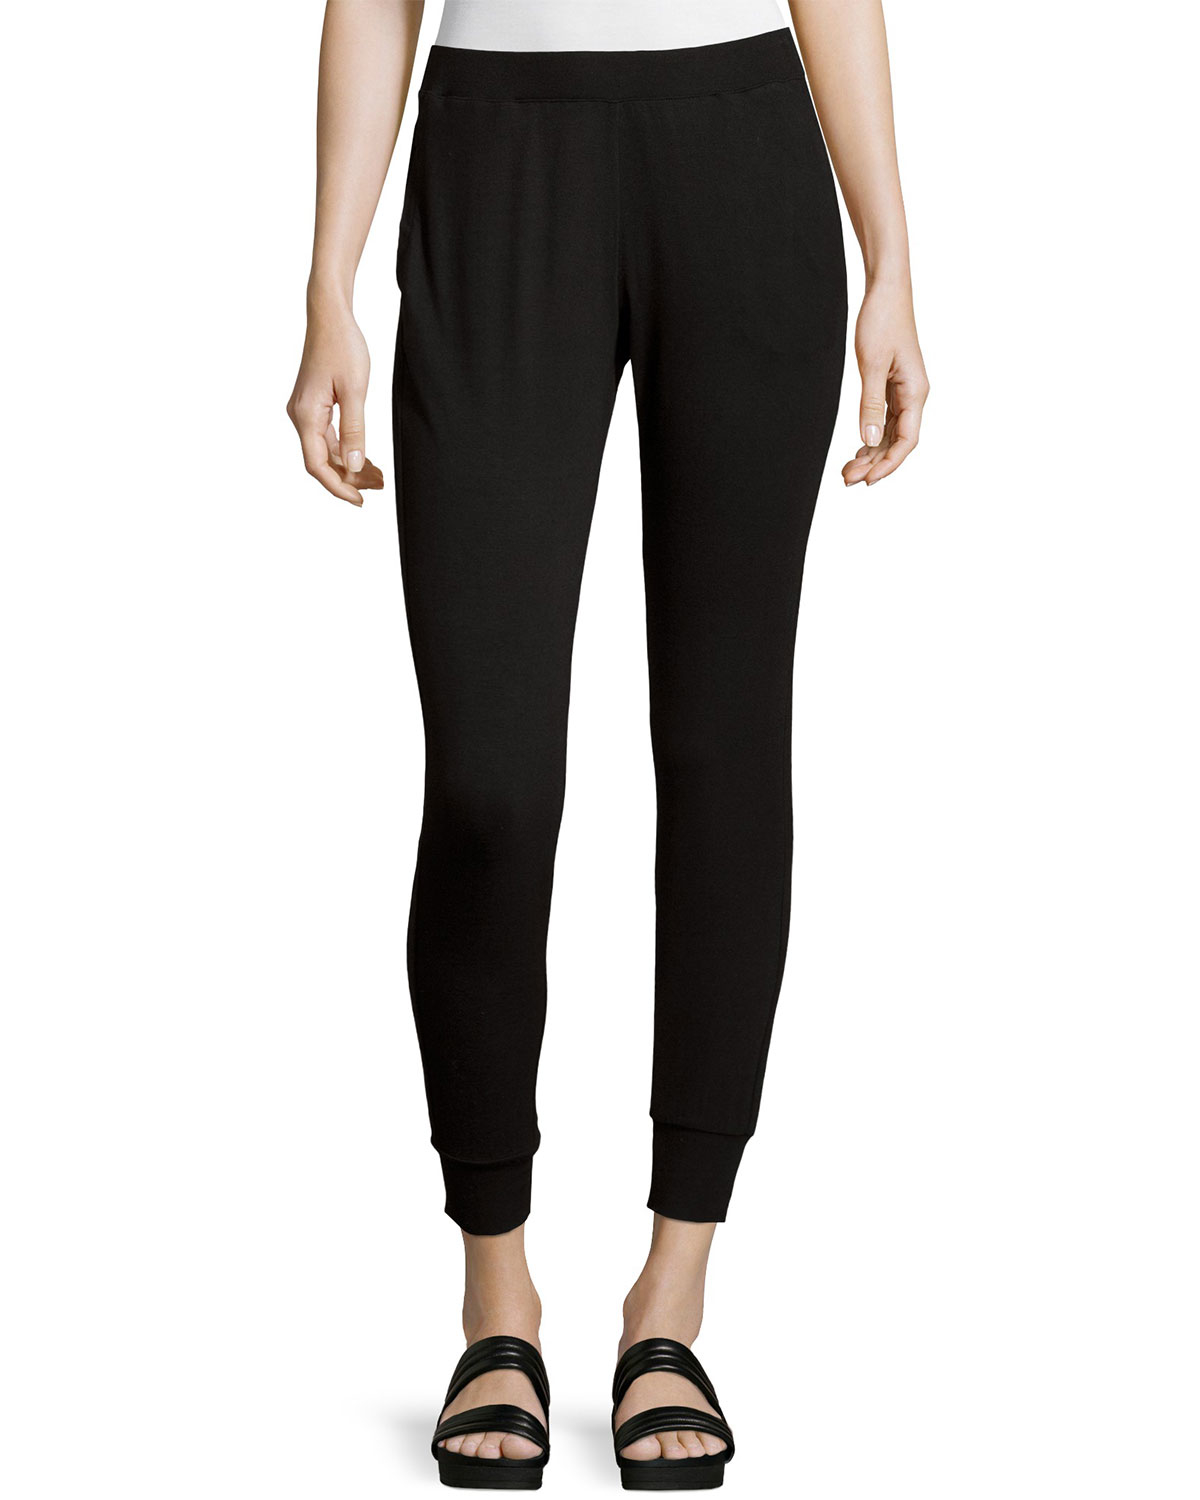 Lyst - Neiman Marcus Cropped Pull-on Track Pants in Black